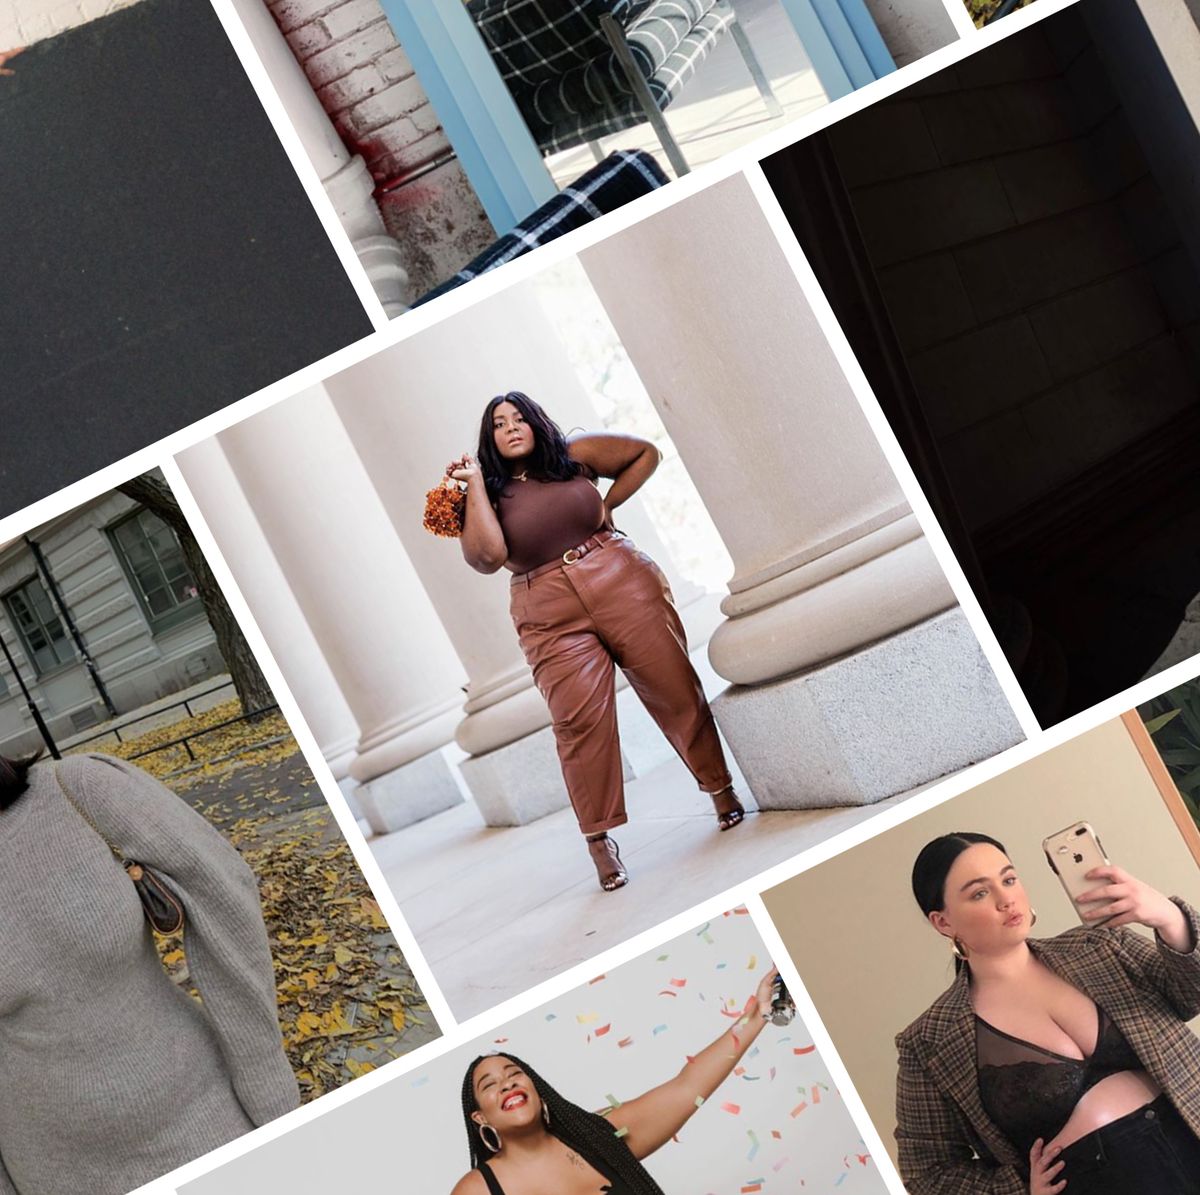 Designer Looks For Less — Plus Size Fashion Influencer & Consultant